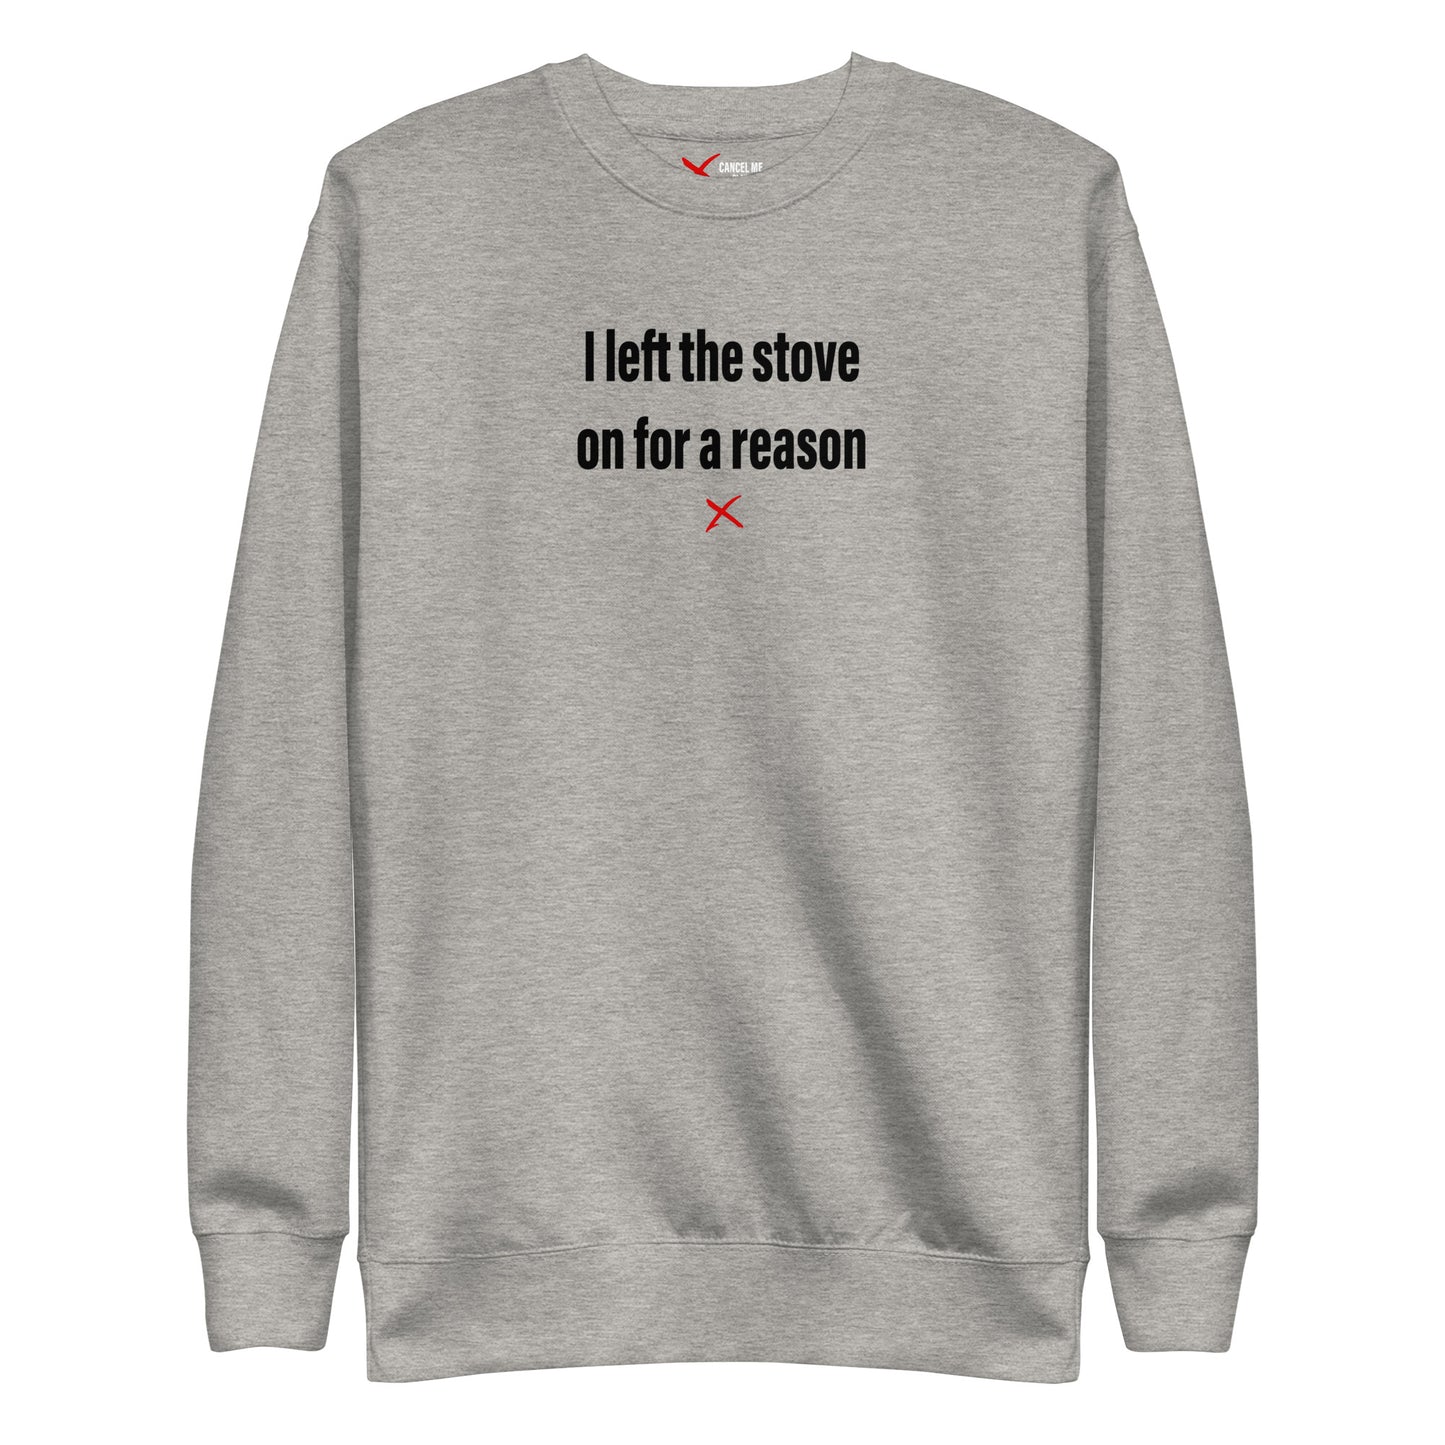 I left the stove on for a reason - Sweatshirt